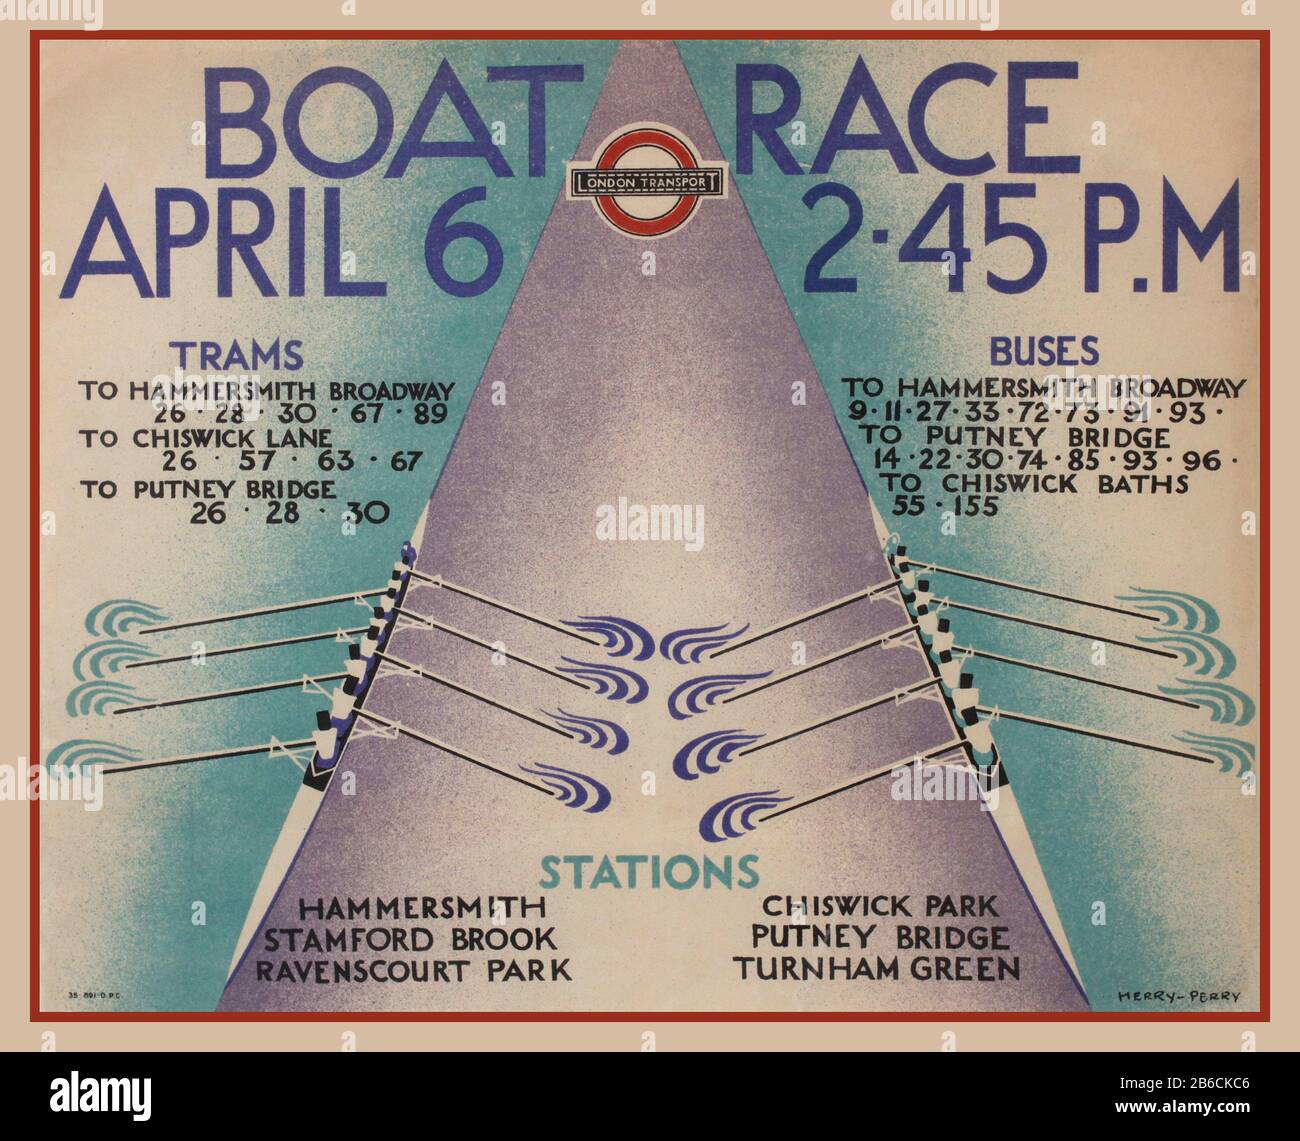 Jahrgang 1935 British Boat Race Poster Herry-Perry (Heather Perry 1893-1962) Boat Race, Underground Panel Poster Printed for London Transport by Dangerfield Press 1935 Stockfoto